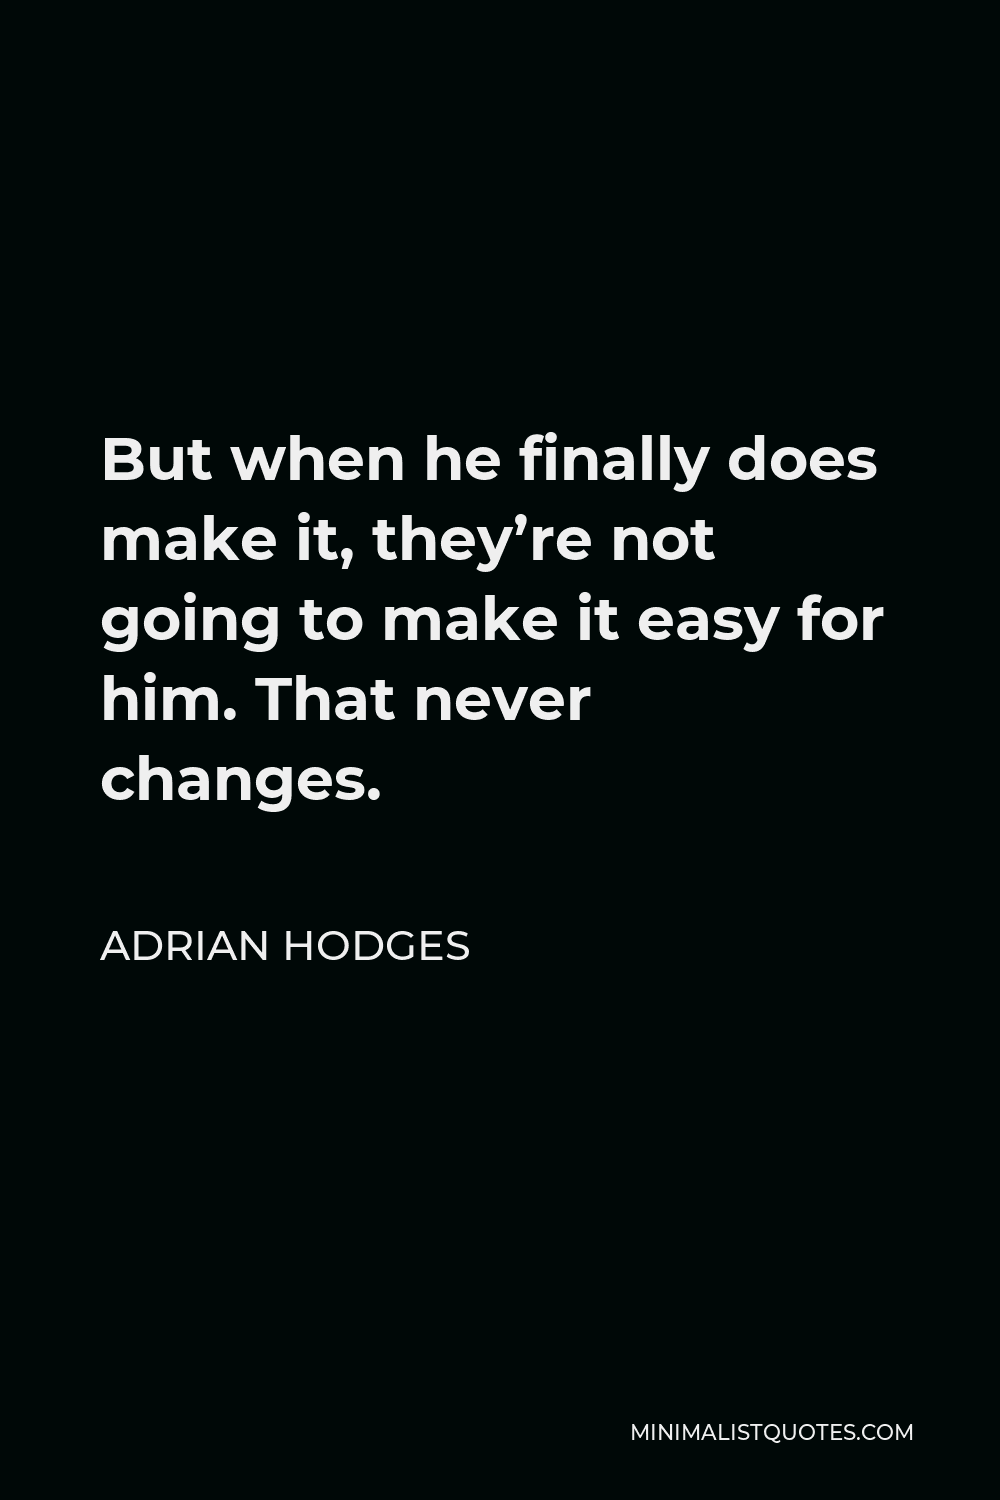 Adrian Hodges Quote - But when he finally does make it, they’re not going to make it easy for him. That never changes.